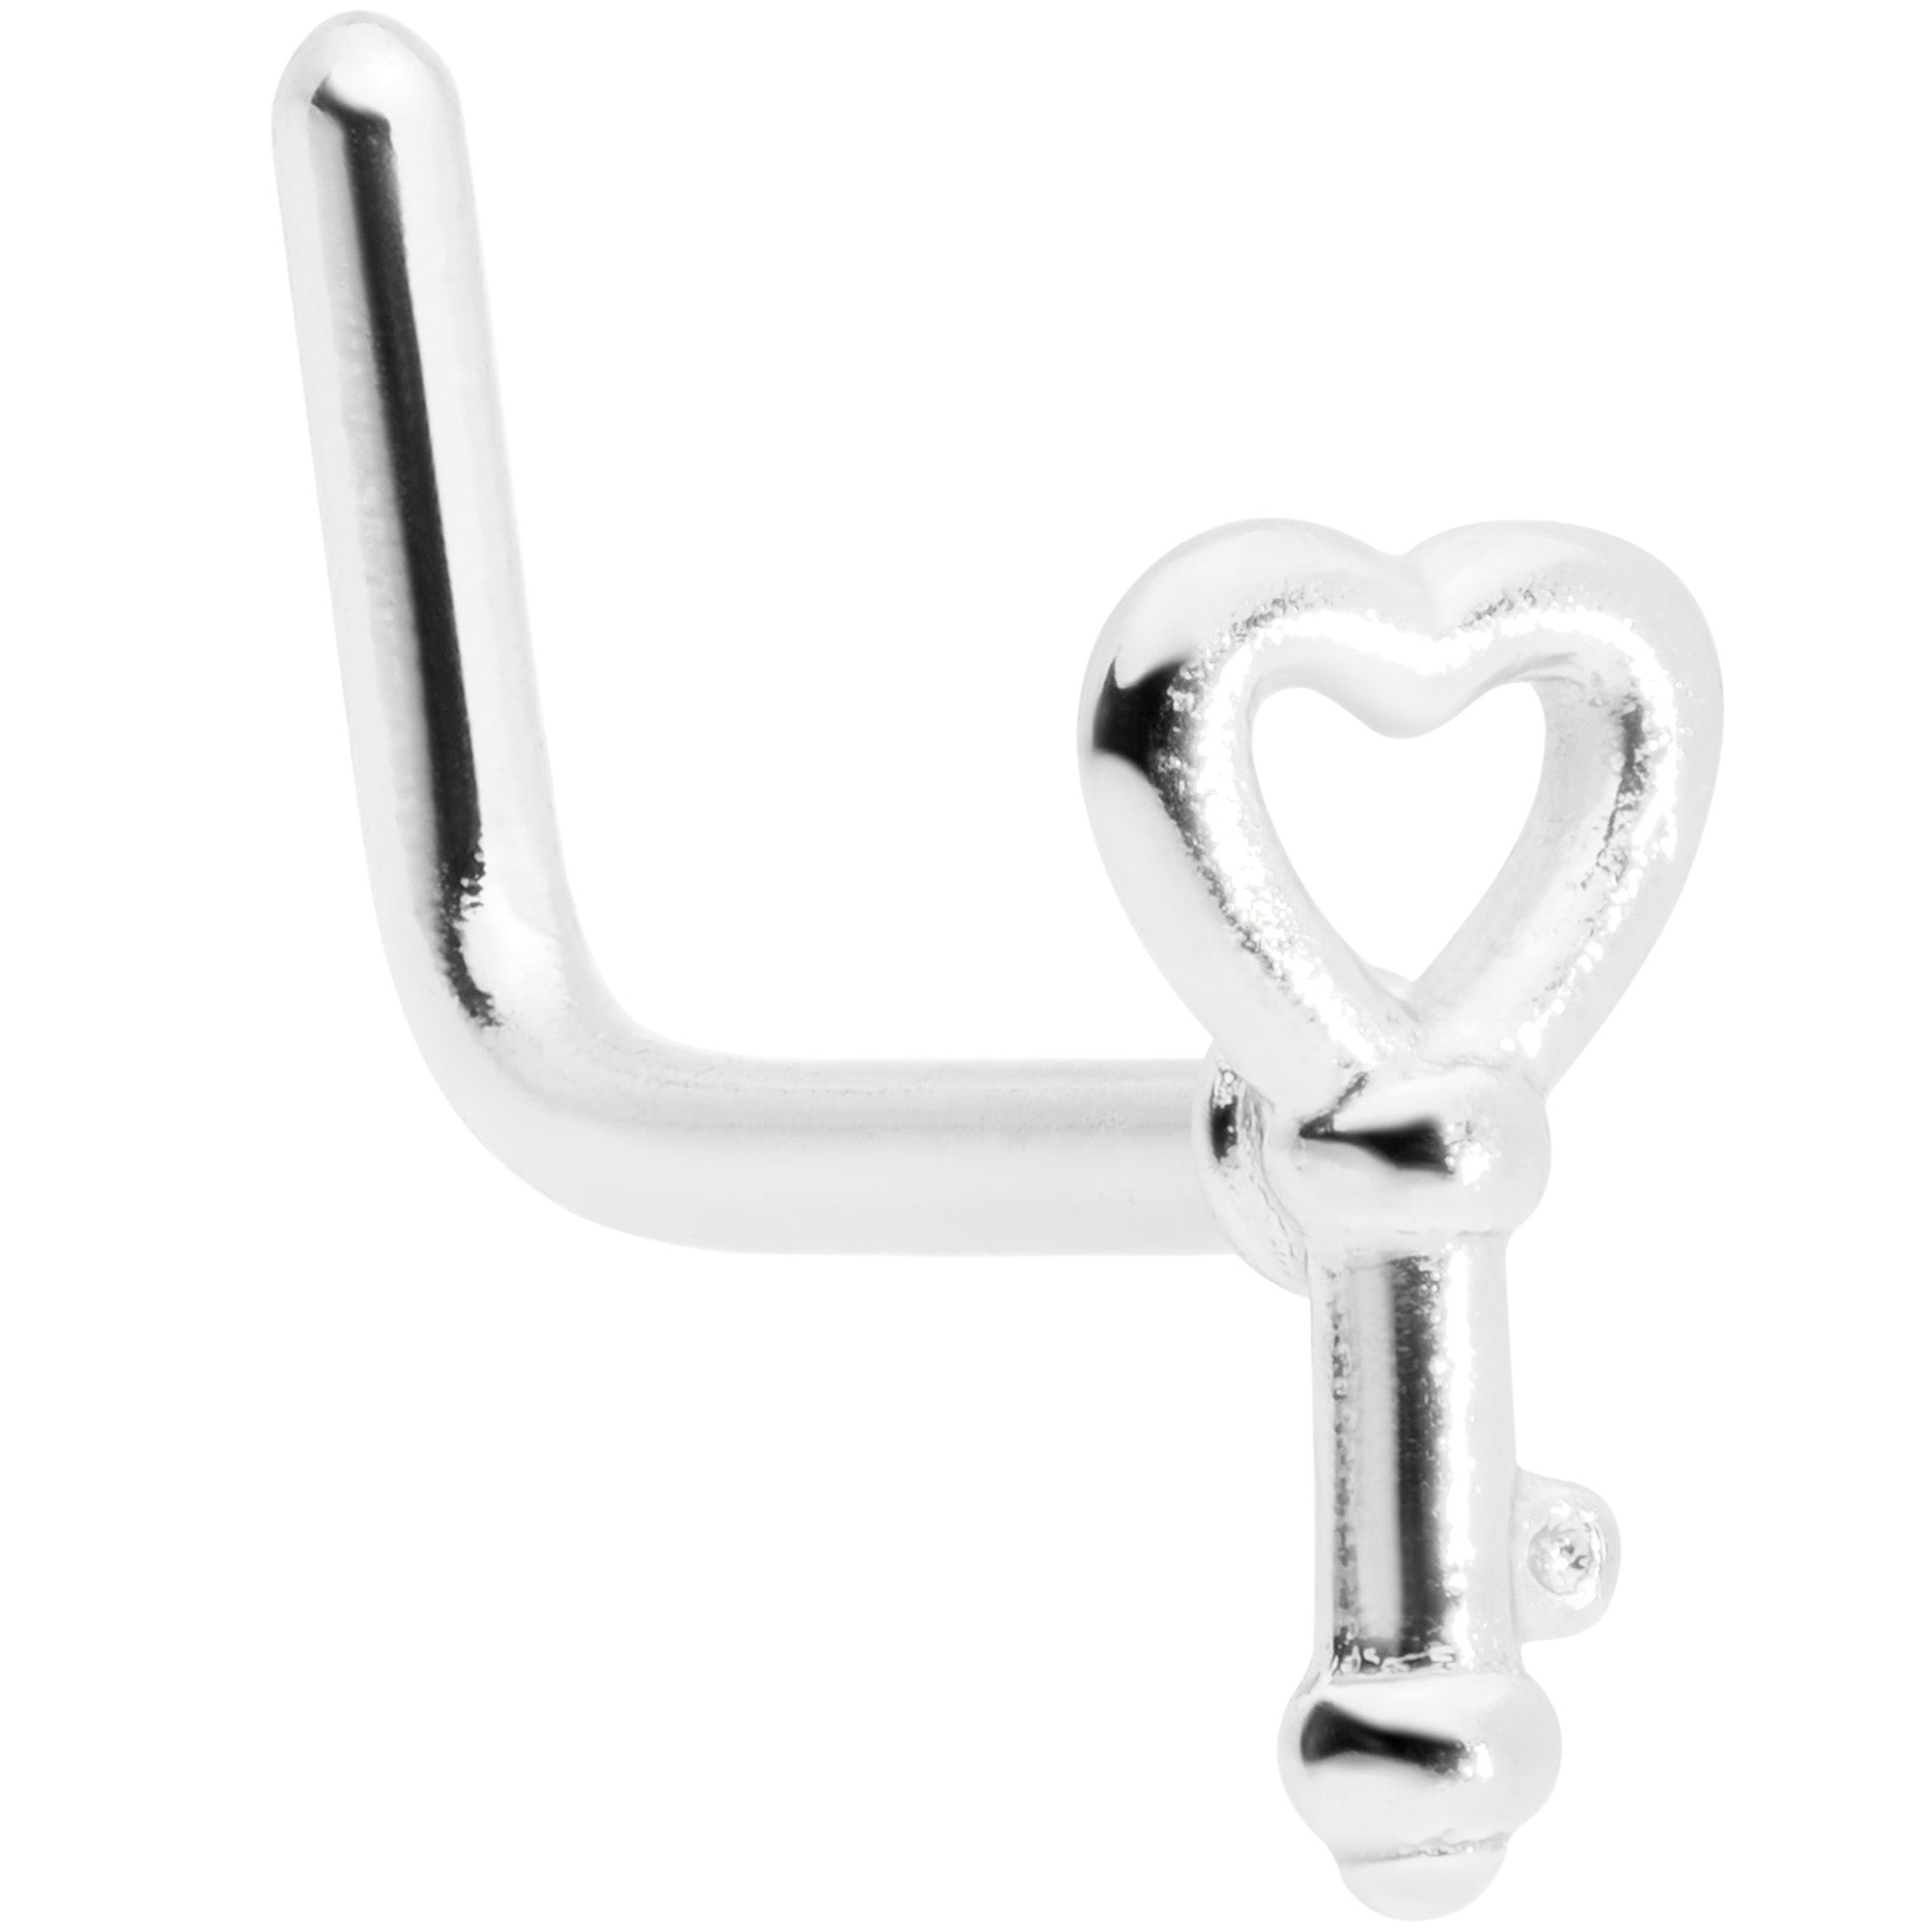 20 Gauge 5/16 Key to Your Heart L Shaped Nose Ring